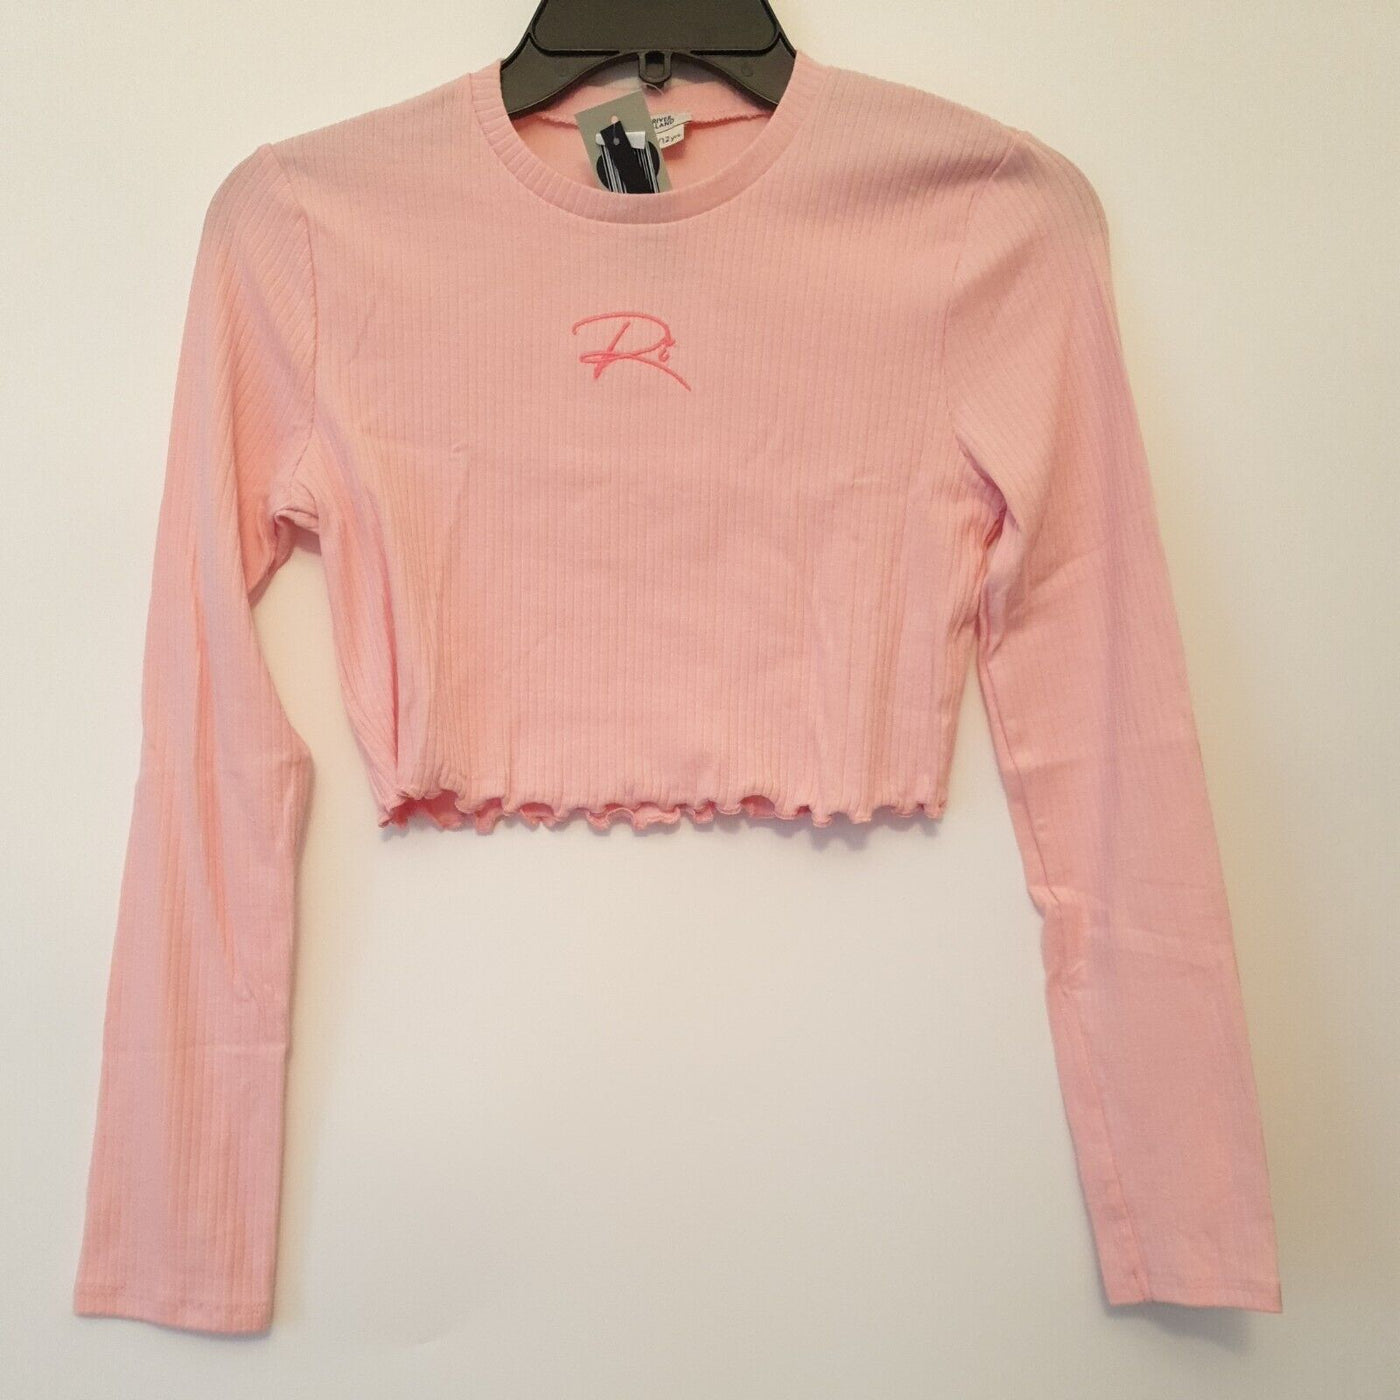 River Island Pink Cropped Long-sleeve Top Size 11-12yrs****Ref V104